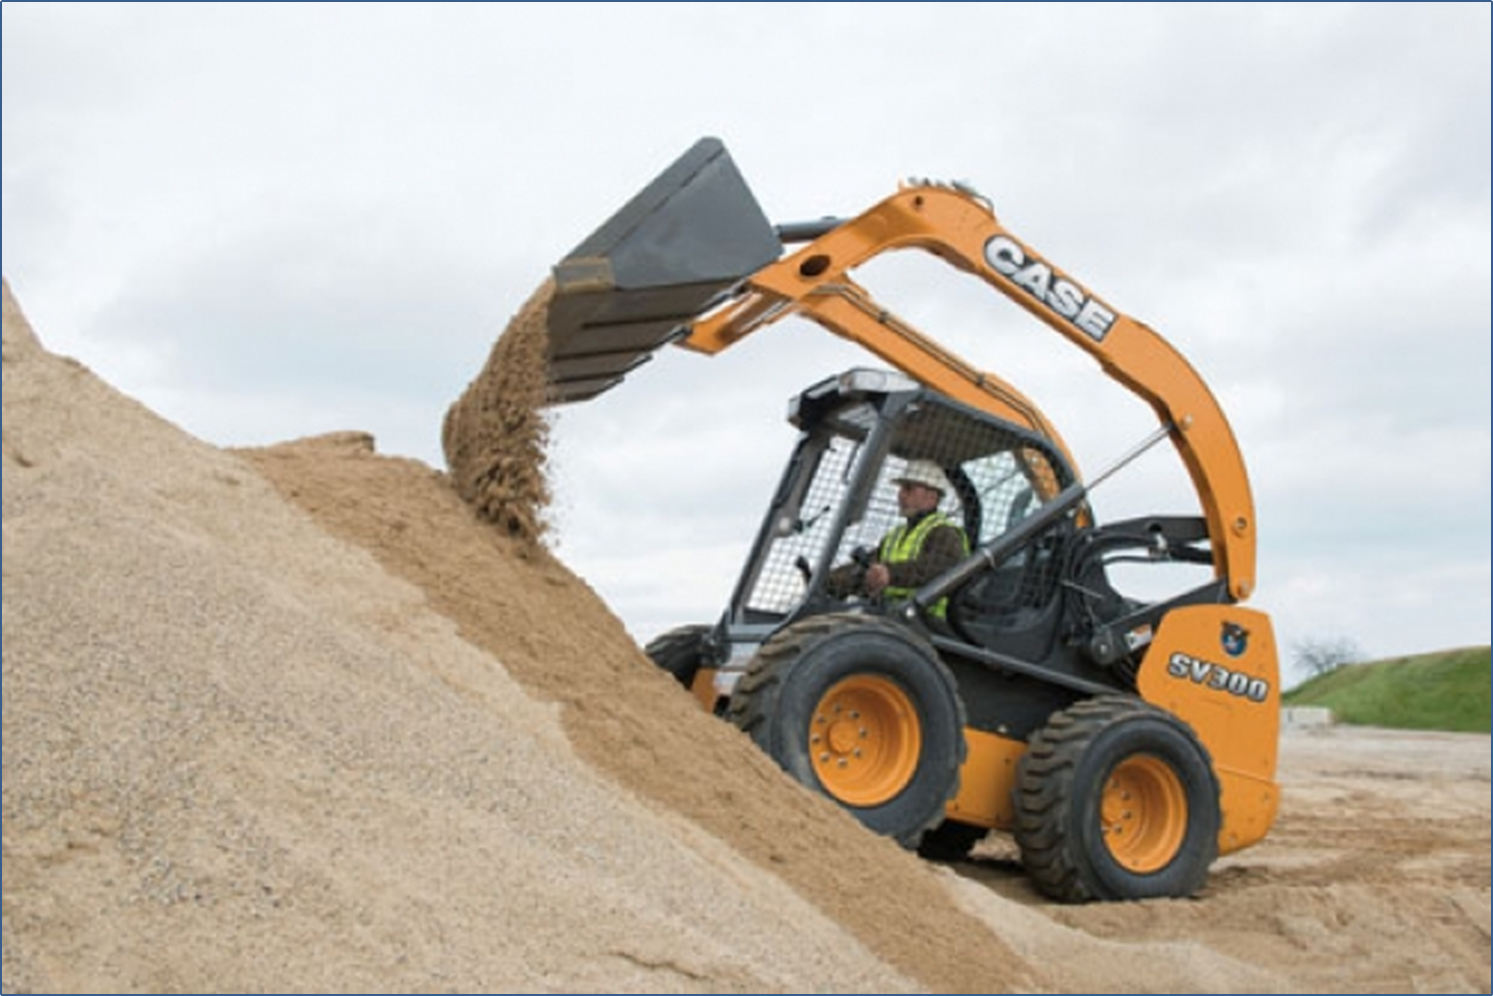 CASE Construction Equipment became the first manufacturer to offer skid steer loaders with SCR